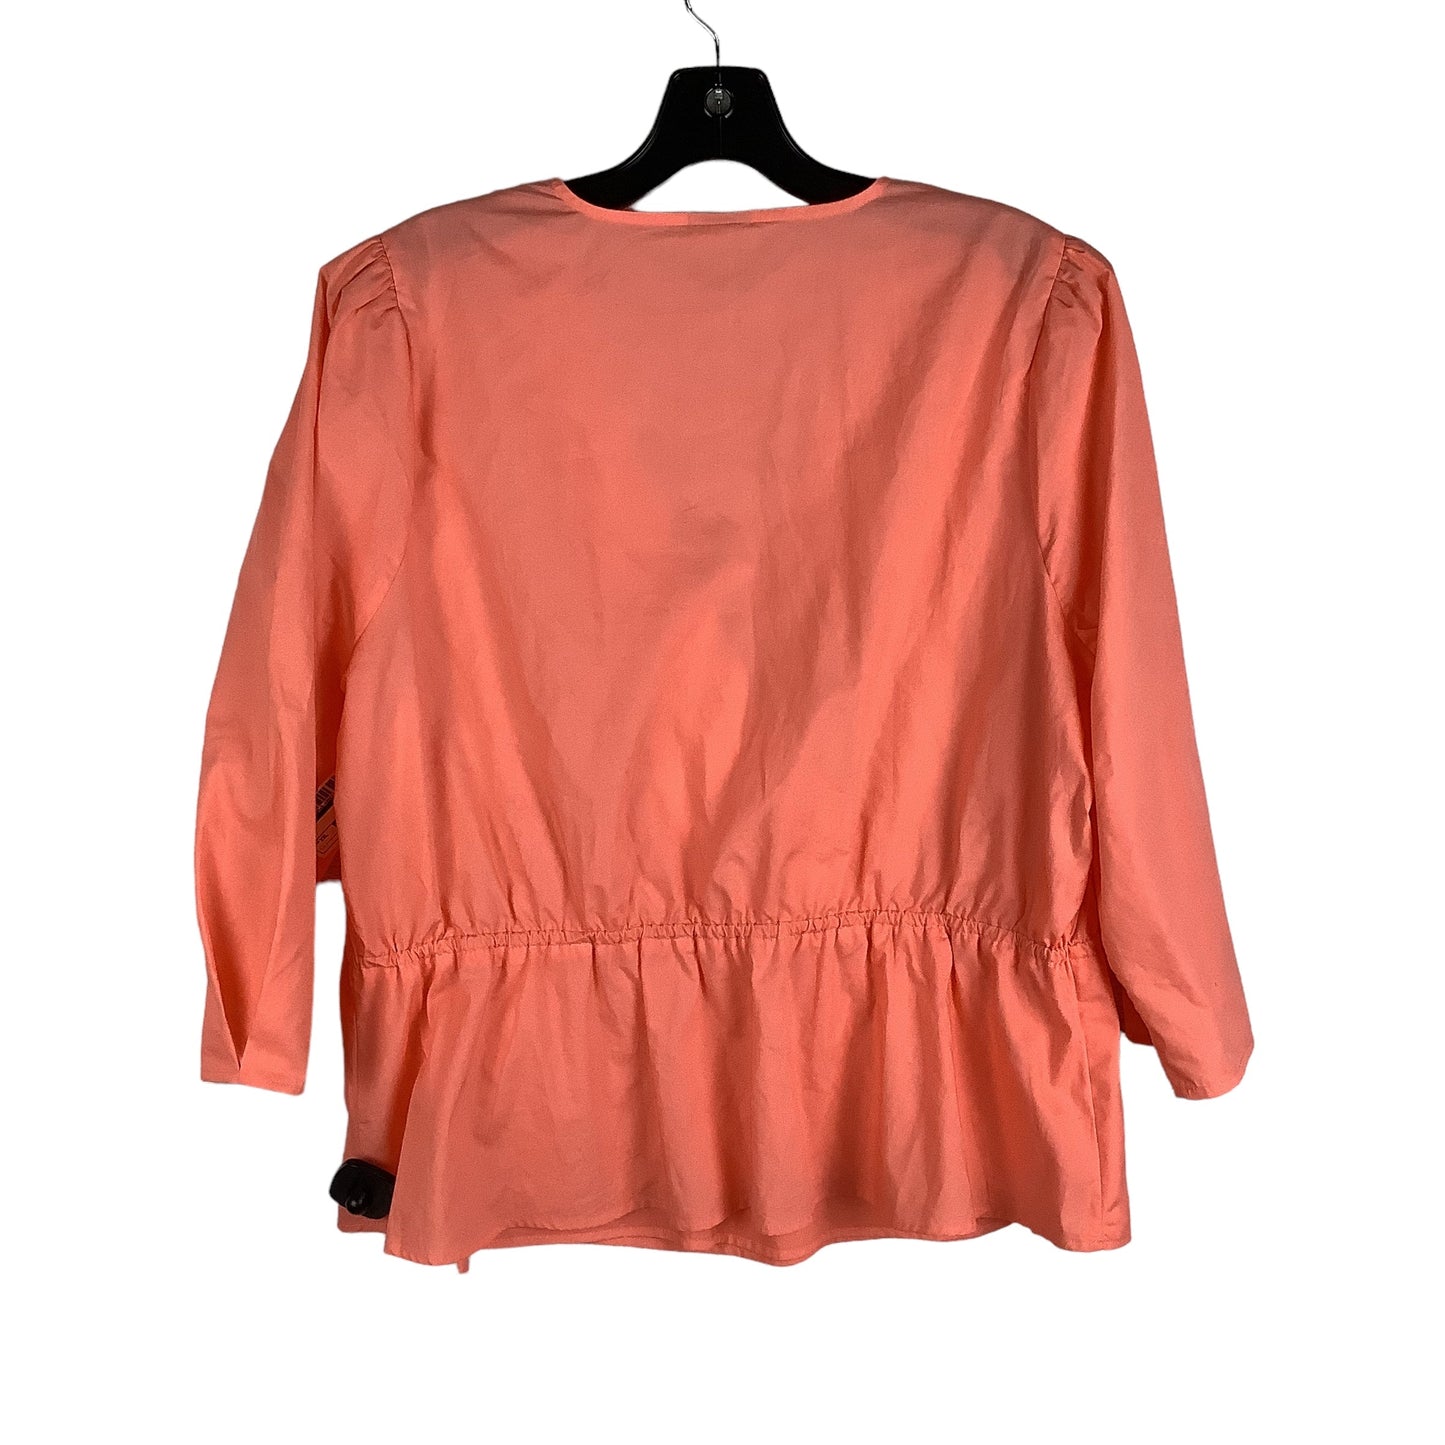 Coral Top Long Sleeve A New Day, Size Xxl